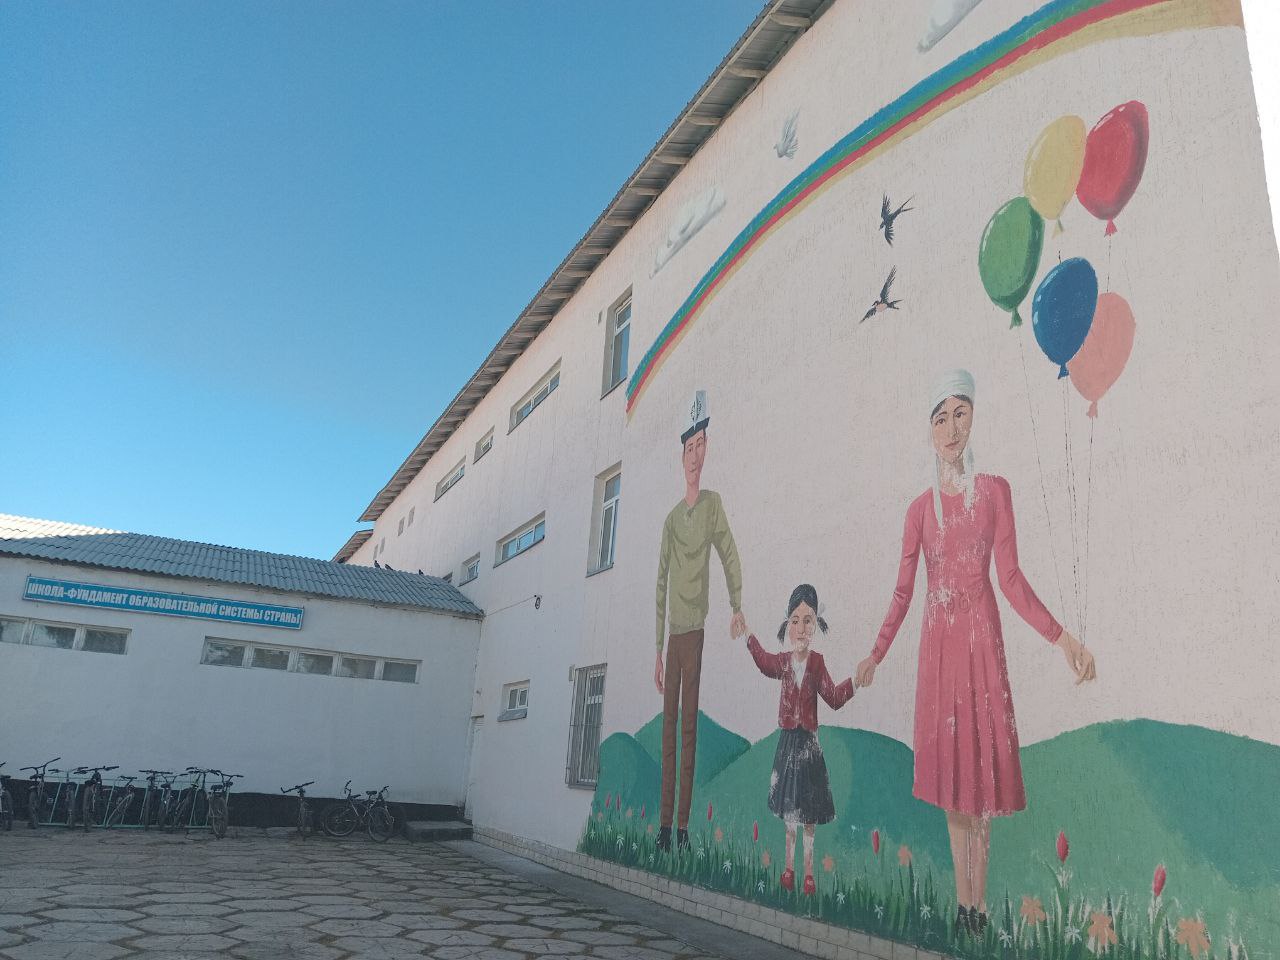 mural on a white school building of a man wearing a white Kyrgyz hat, a little girl, and a woman holding hands. balloons in the woman's second hand and a couple birds and a rainbow above the people